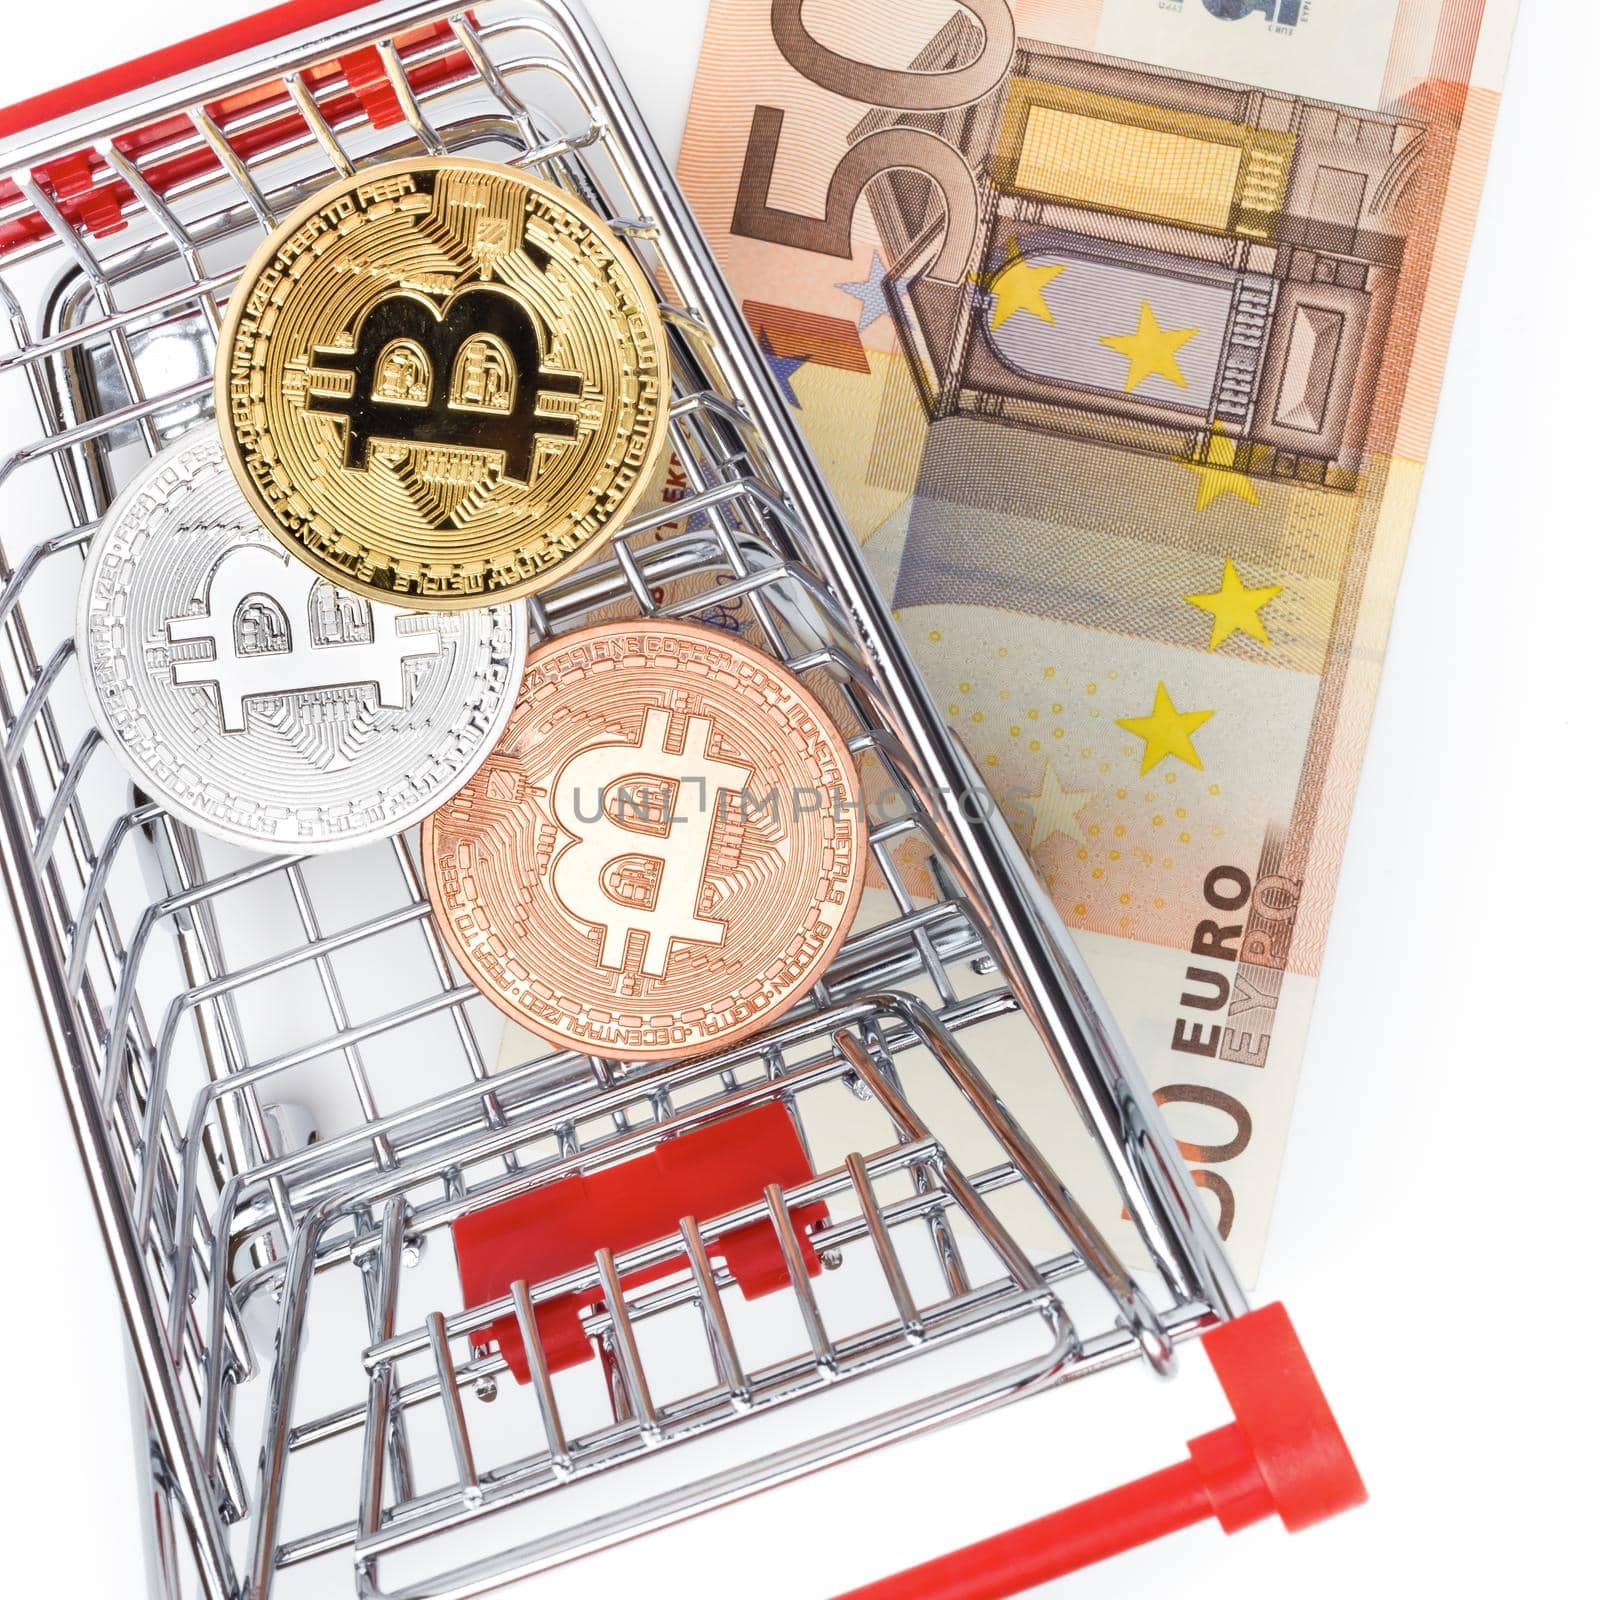 Image of bitcoins in shopping cart on euro bill